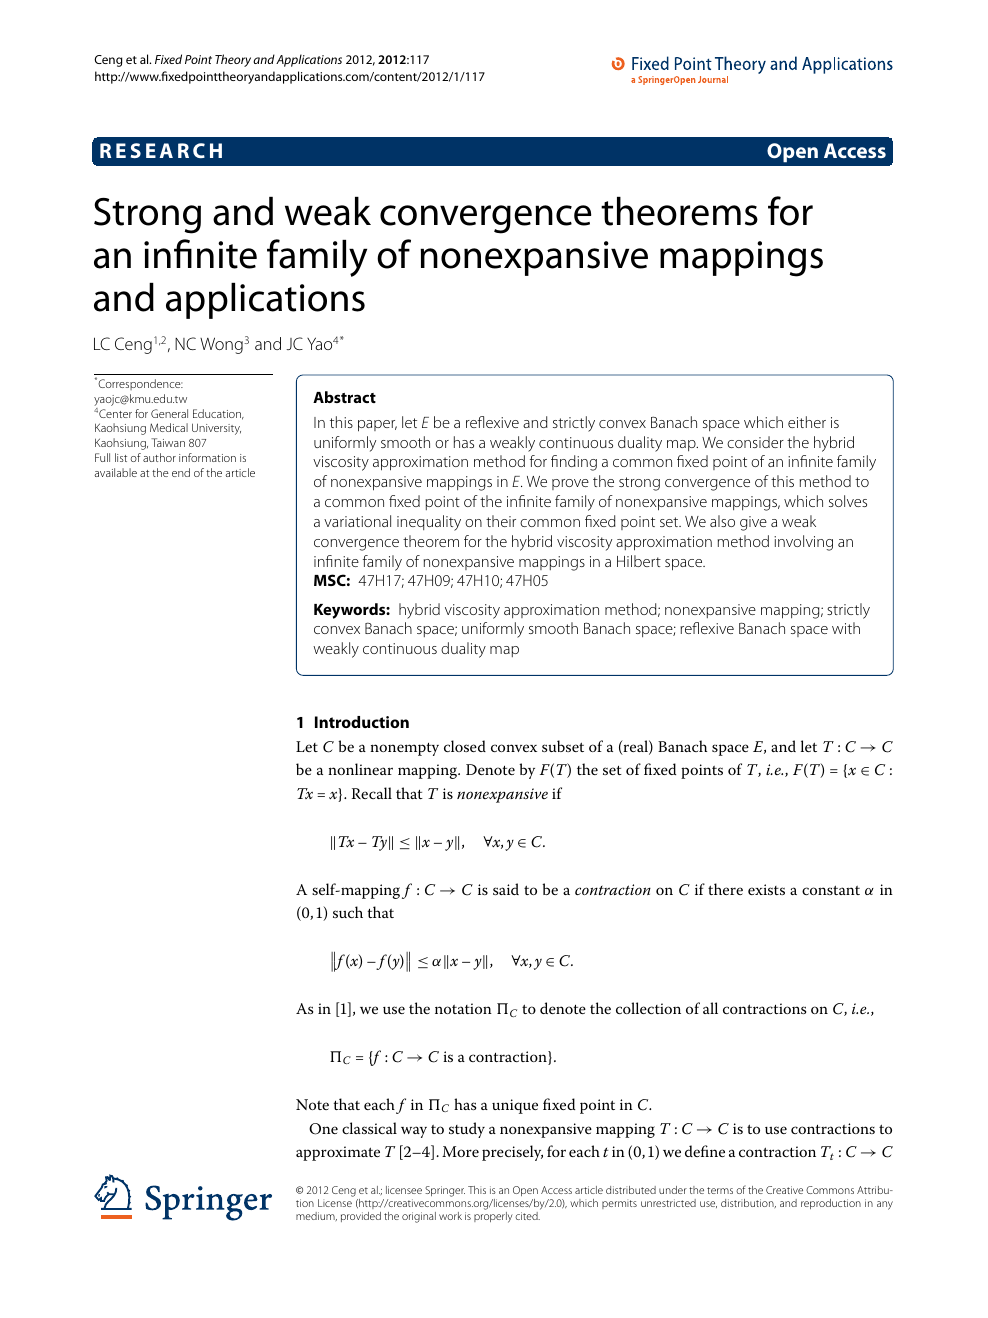 Strong And Weak Convergence Theorems For An Infinite Family Of Nonexpansive Mappings And Applications Topic Of Research Paper In Mathematics Download Scholarly Article Pdf And Read For Free On Cyberleninka Open